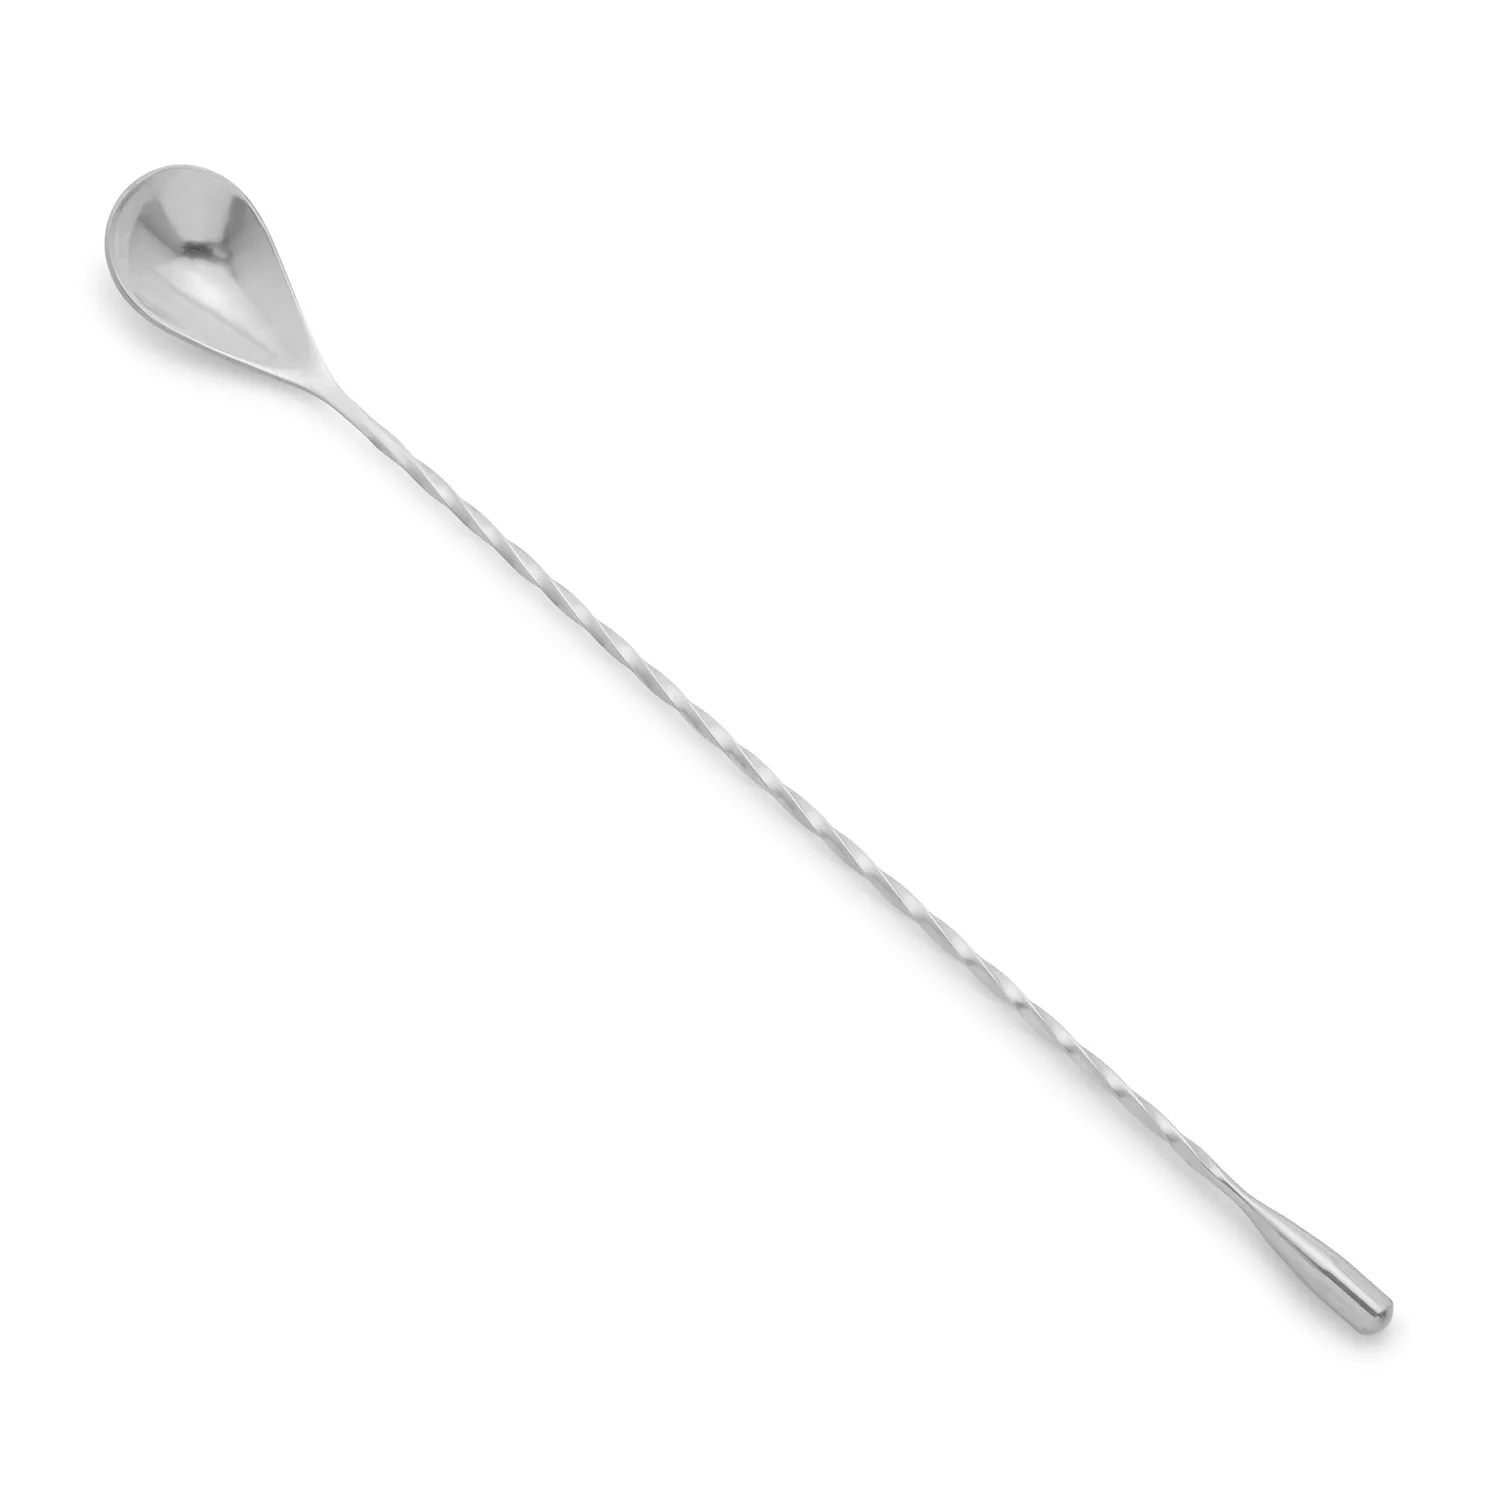 Stainless Steel Cocktail Drink Mixer Stirring Mixing Spoon Ladle